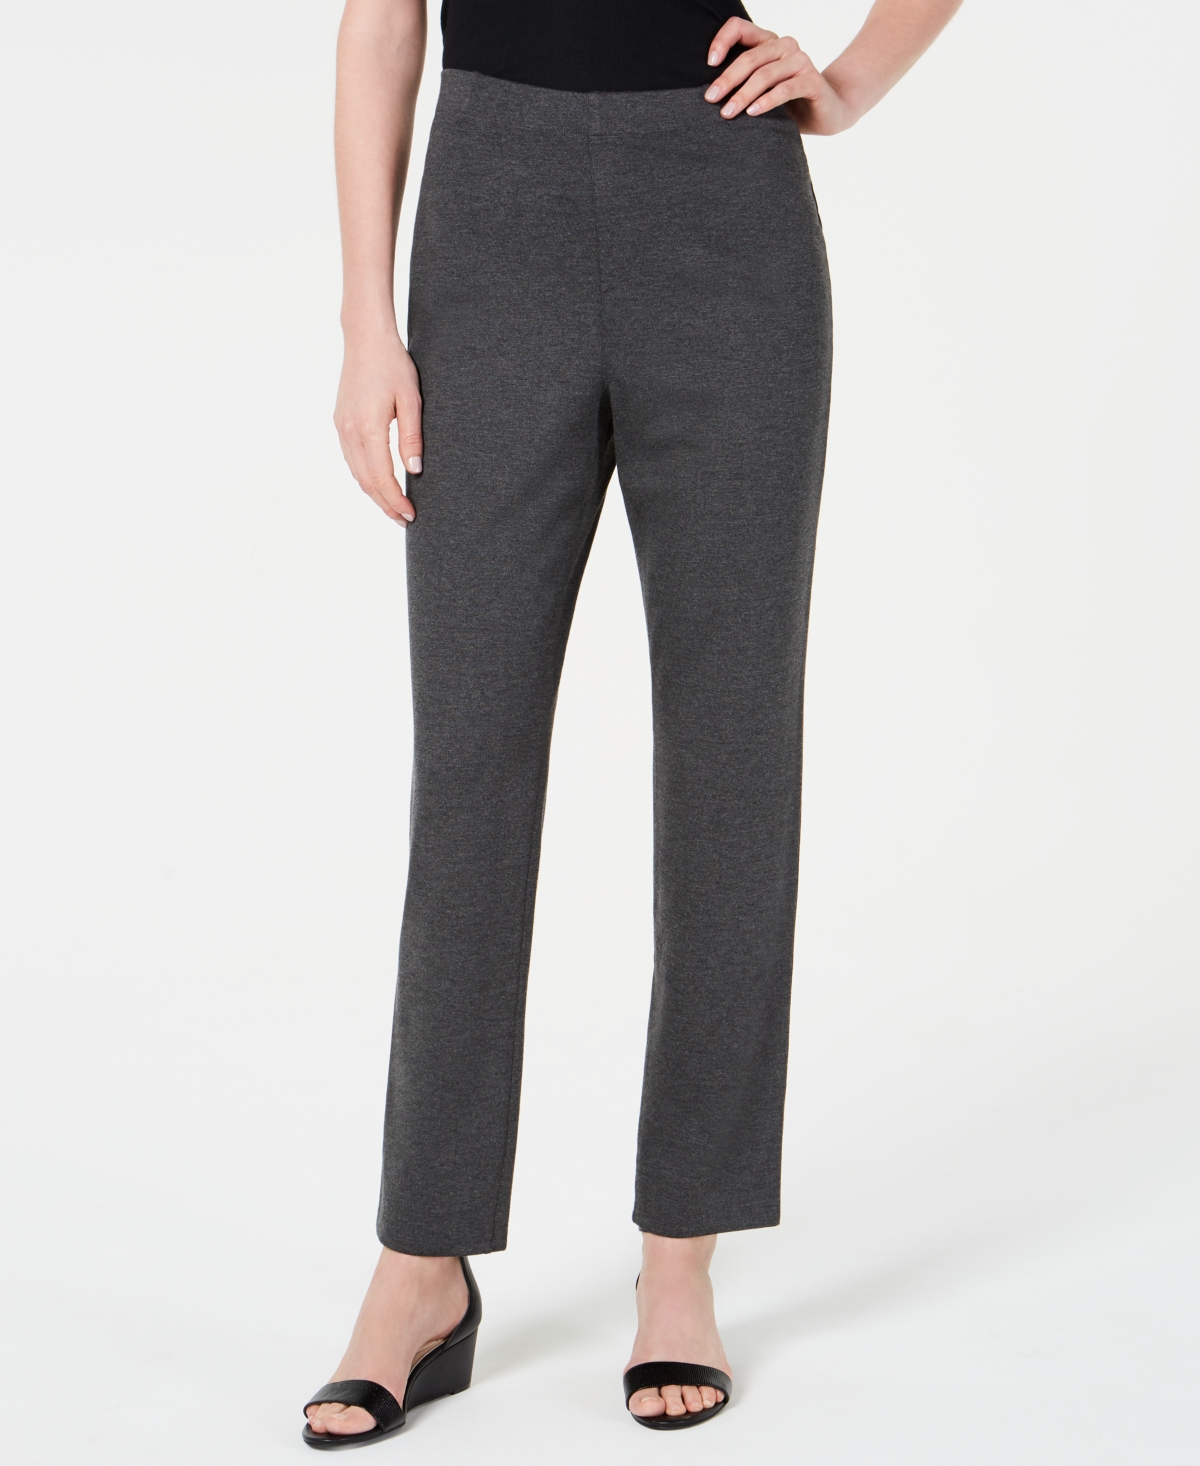 Petite Comfort Pull-On Pants, Created for Macy's - Charcoal Heather